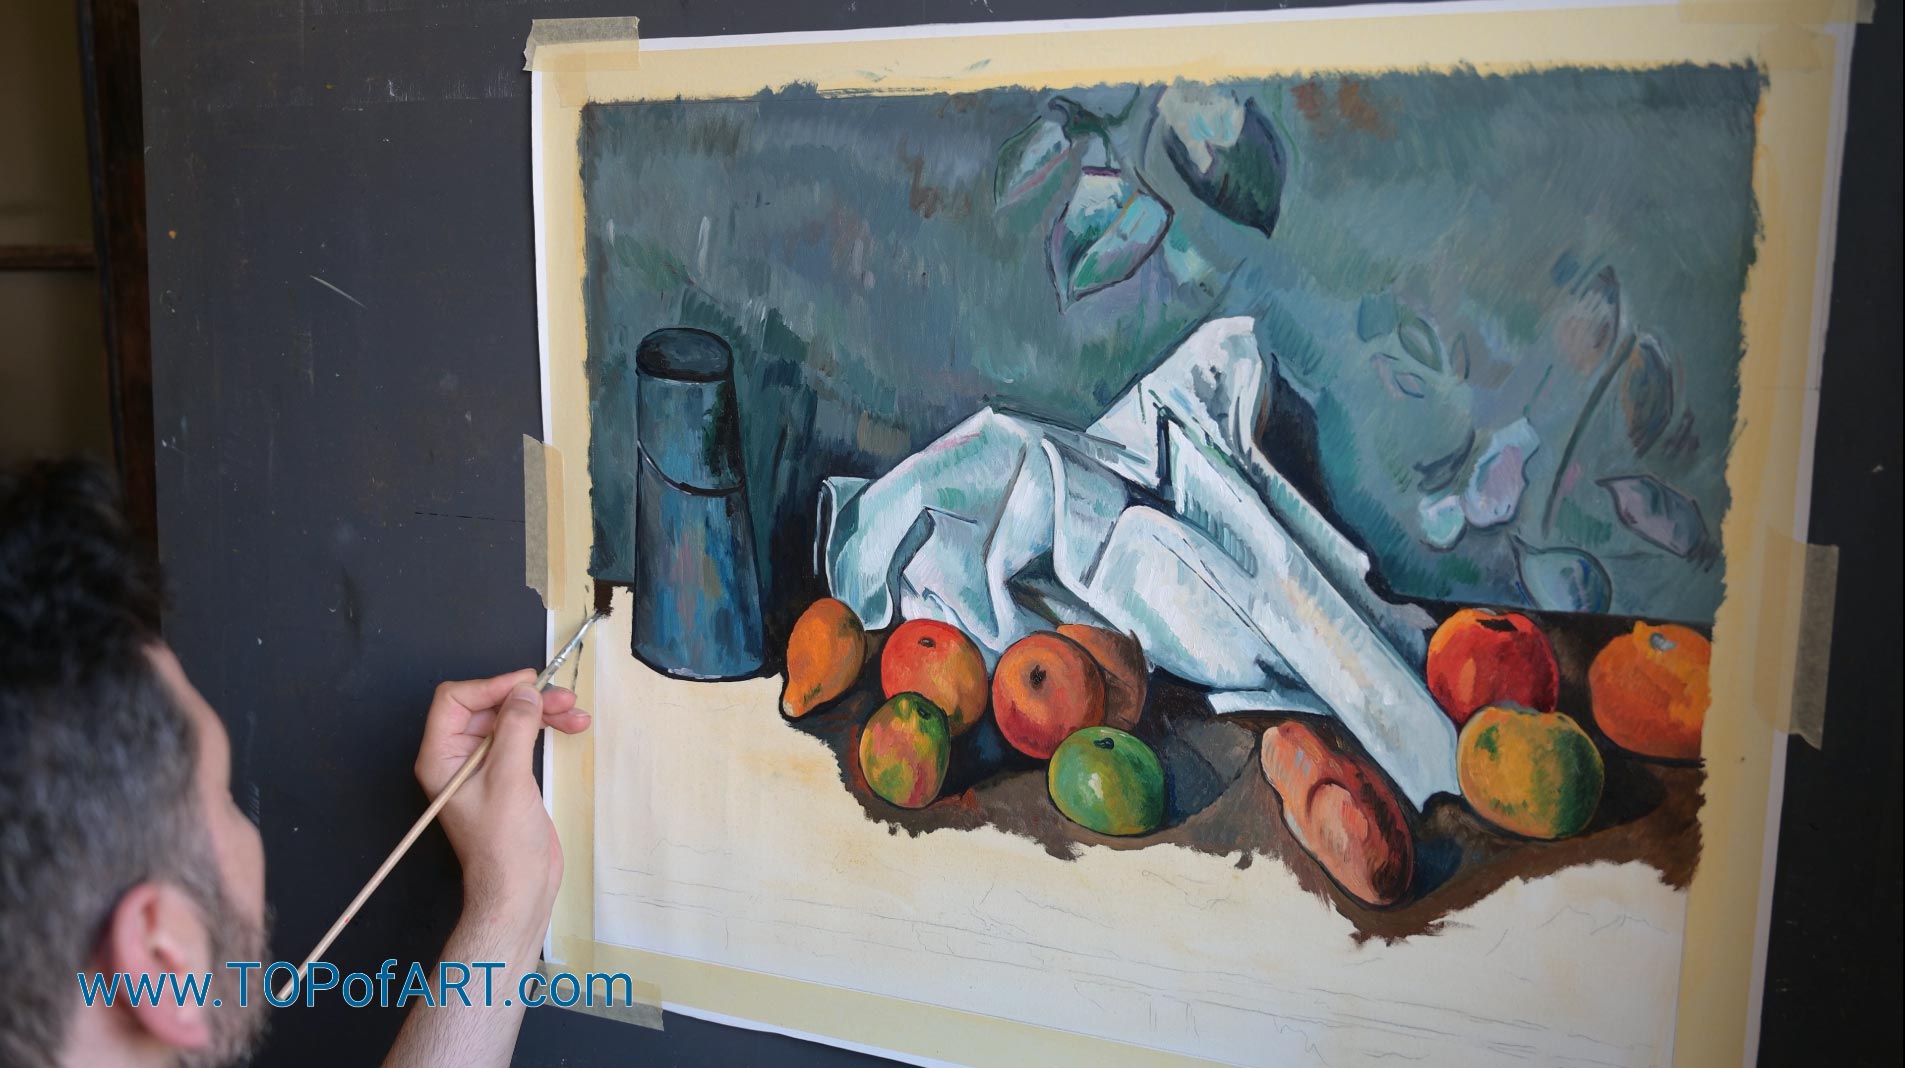 Paul Cezanne - "Still Life with Milk Can and Apples" - Process of Creation of the Painting